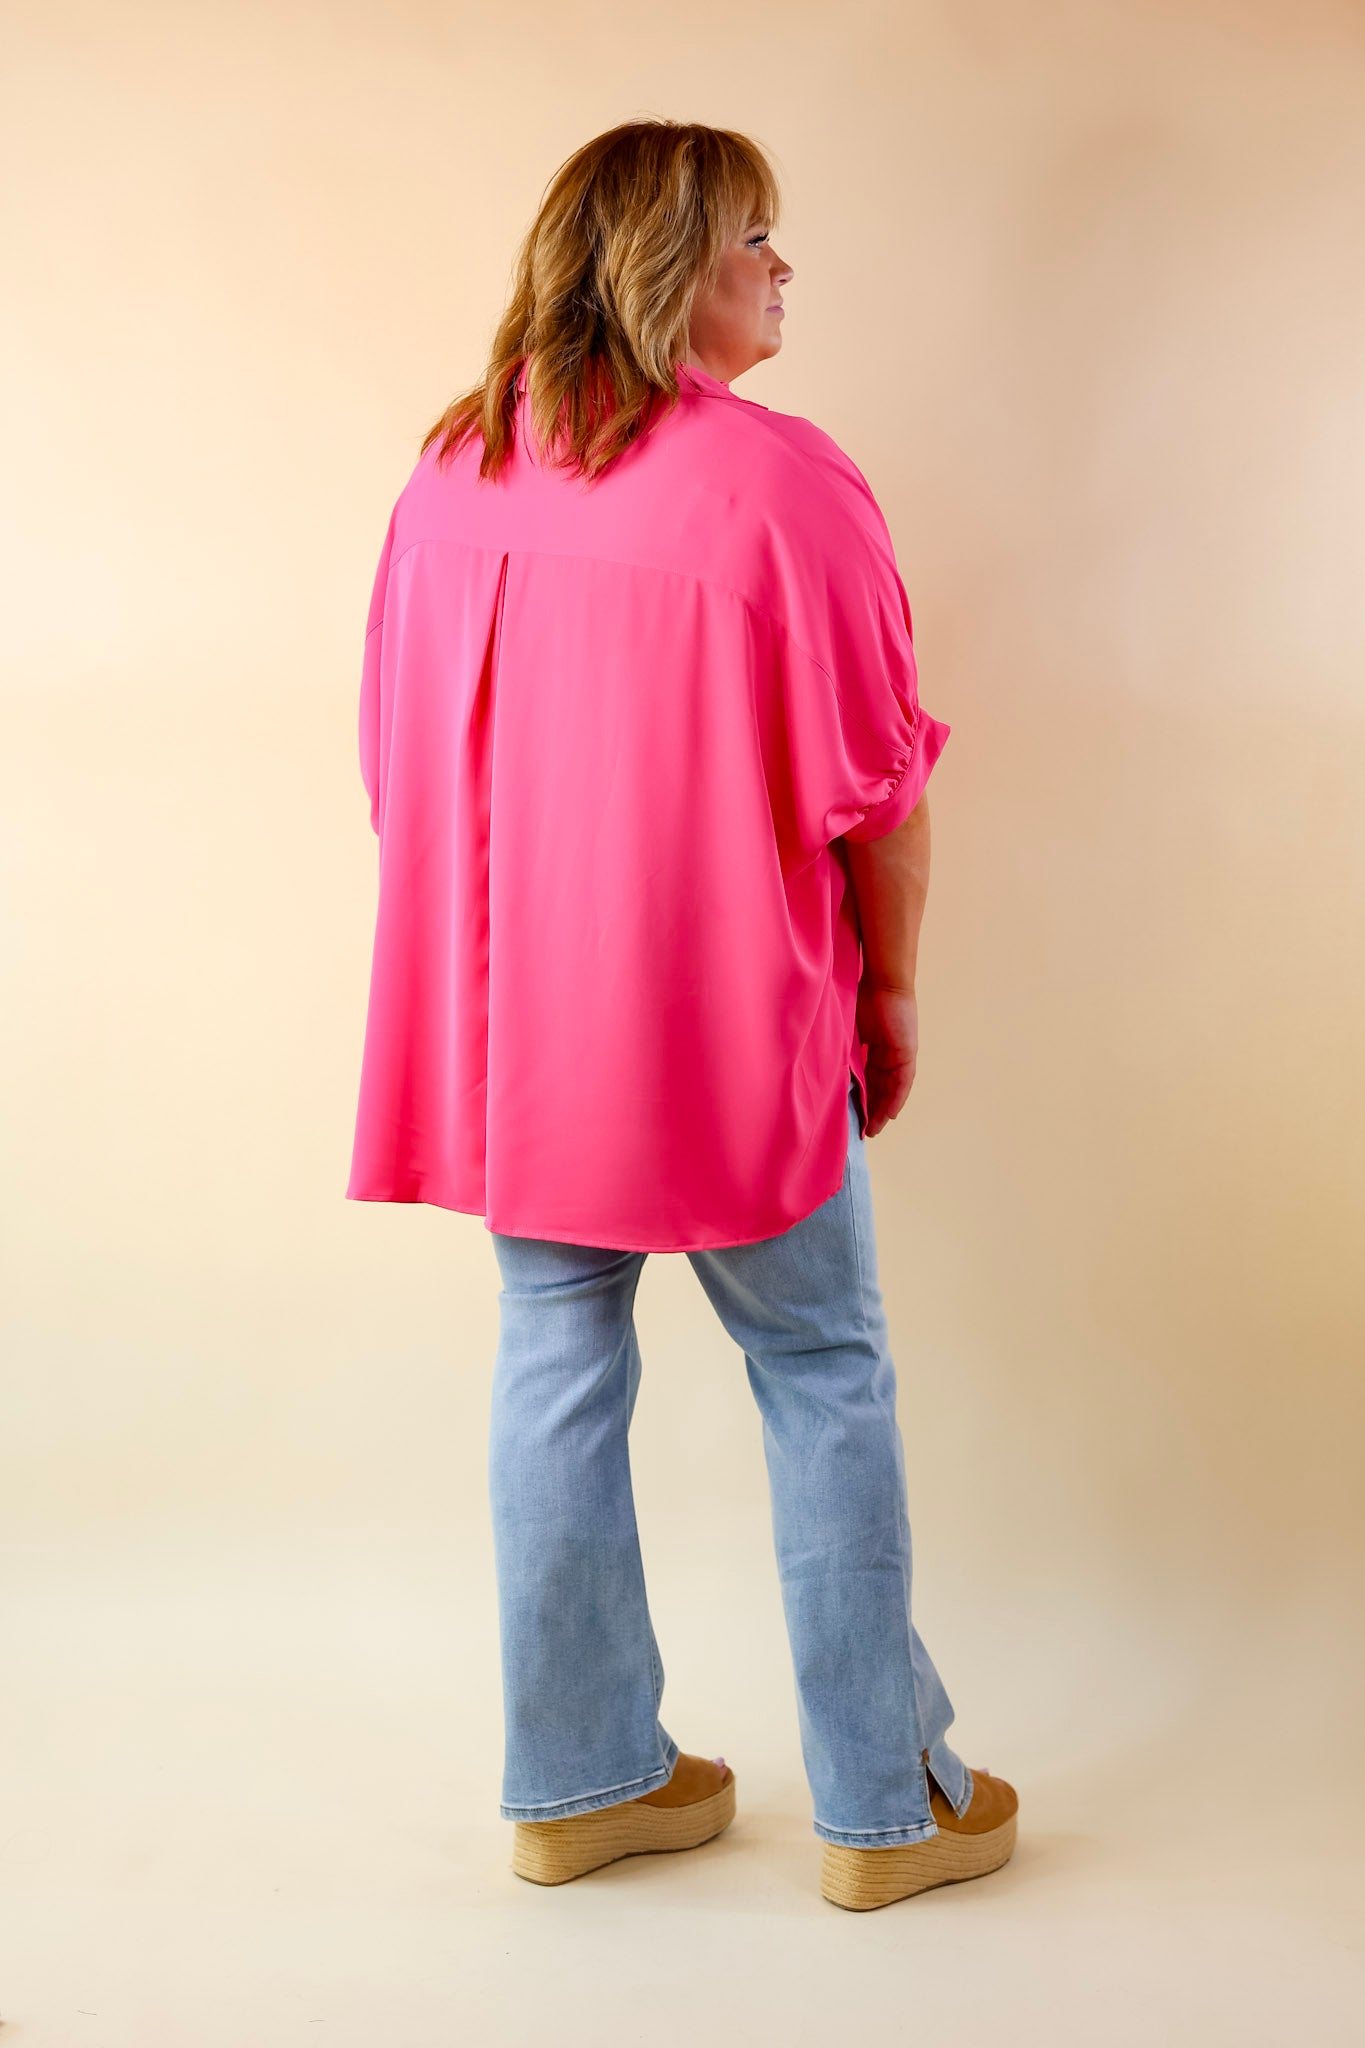 City Lifestyle Button Up Half Sleeve Poncho Top in Hot Pink - Giddy Up Glamour Boutique